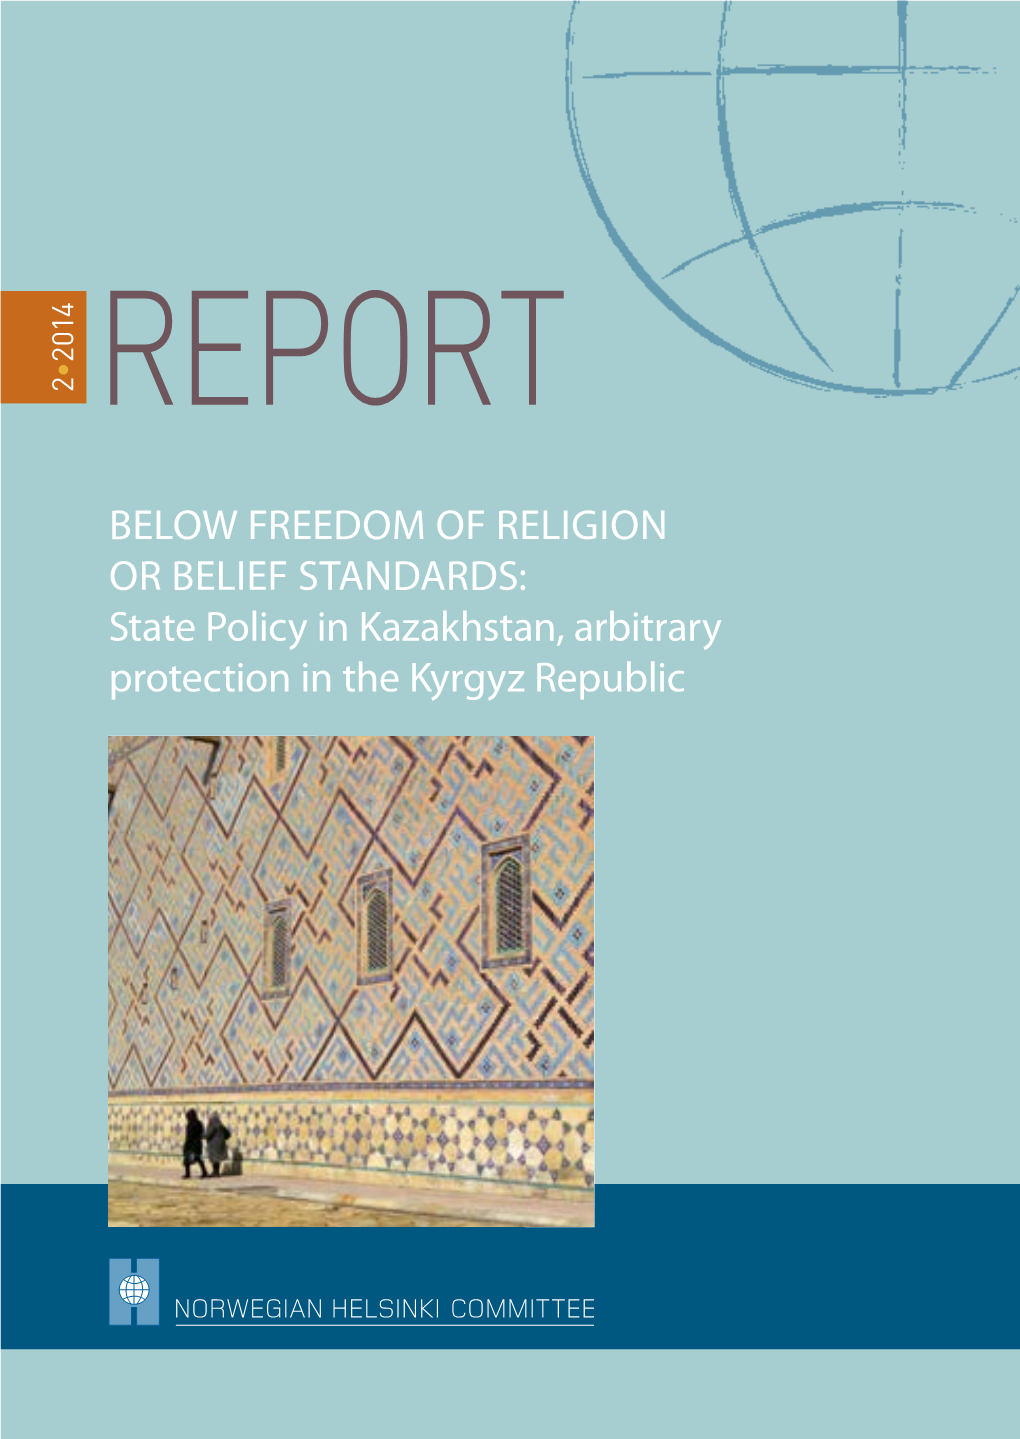 Below Freedom of Religion Or Belief Standards: State Policy in Kazakhstan, Arbitrary Protection in the Kyrgyz Republic